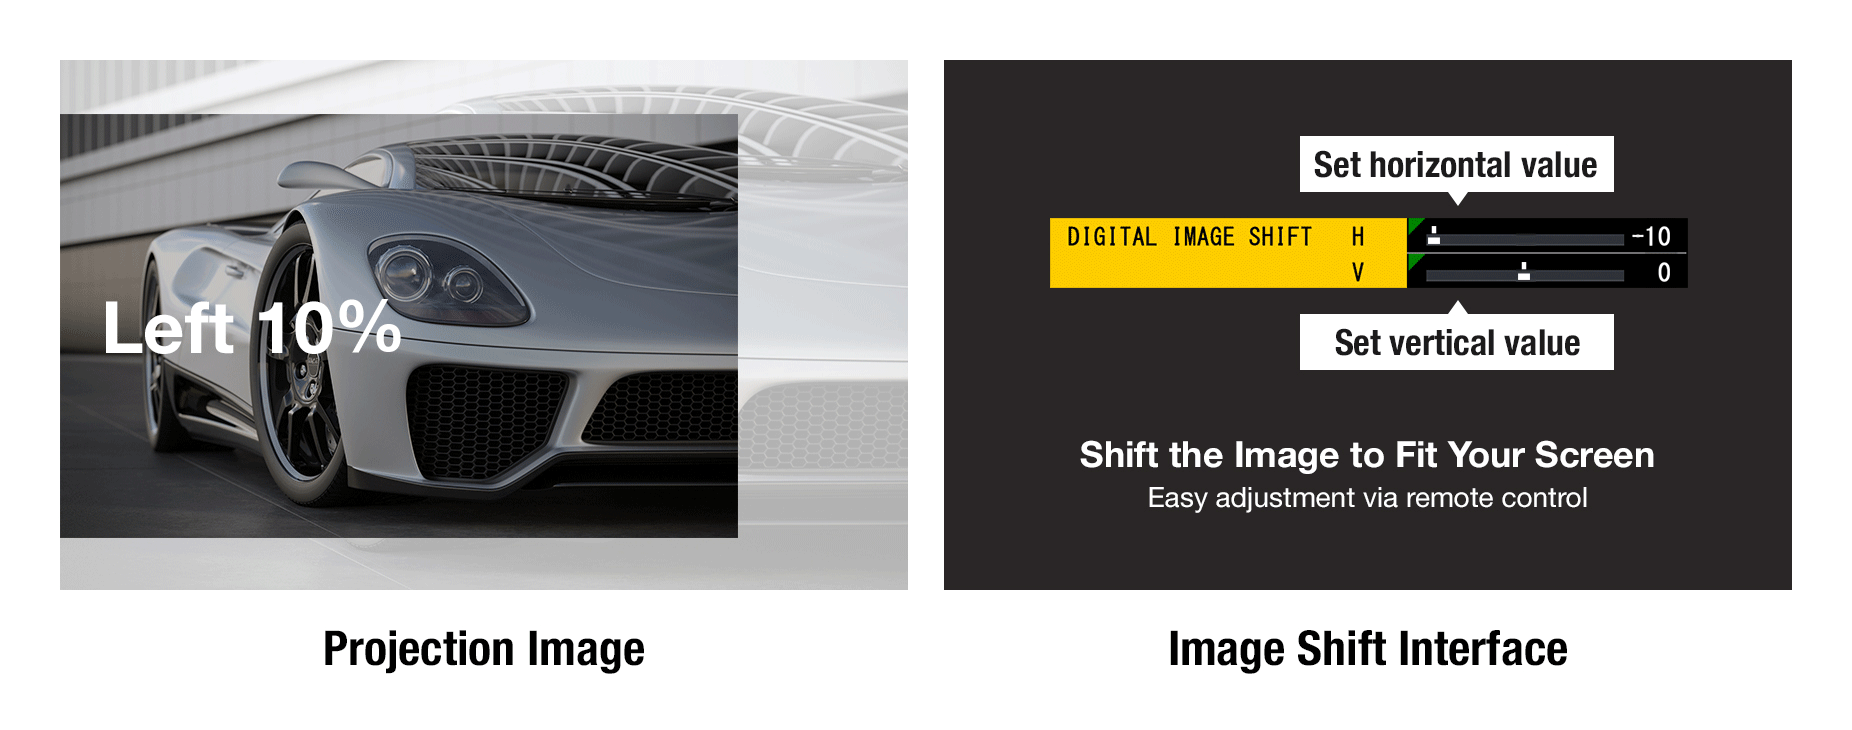 Projection Image / Image Shift Interface